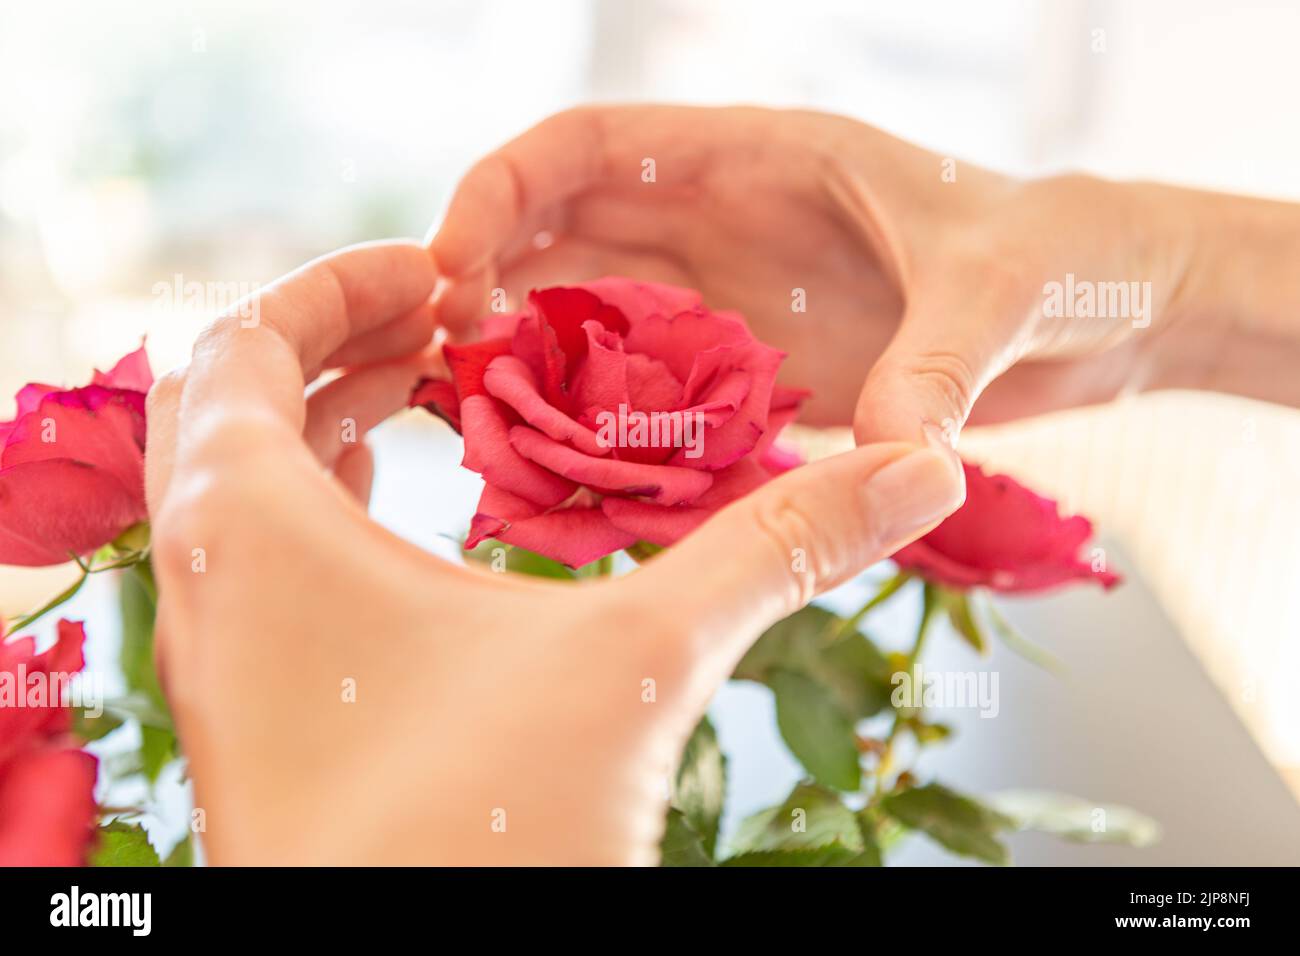 Hands showing heart above a rose. Stock Photo